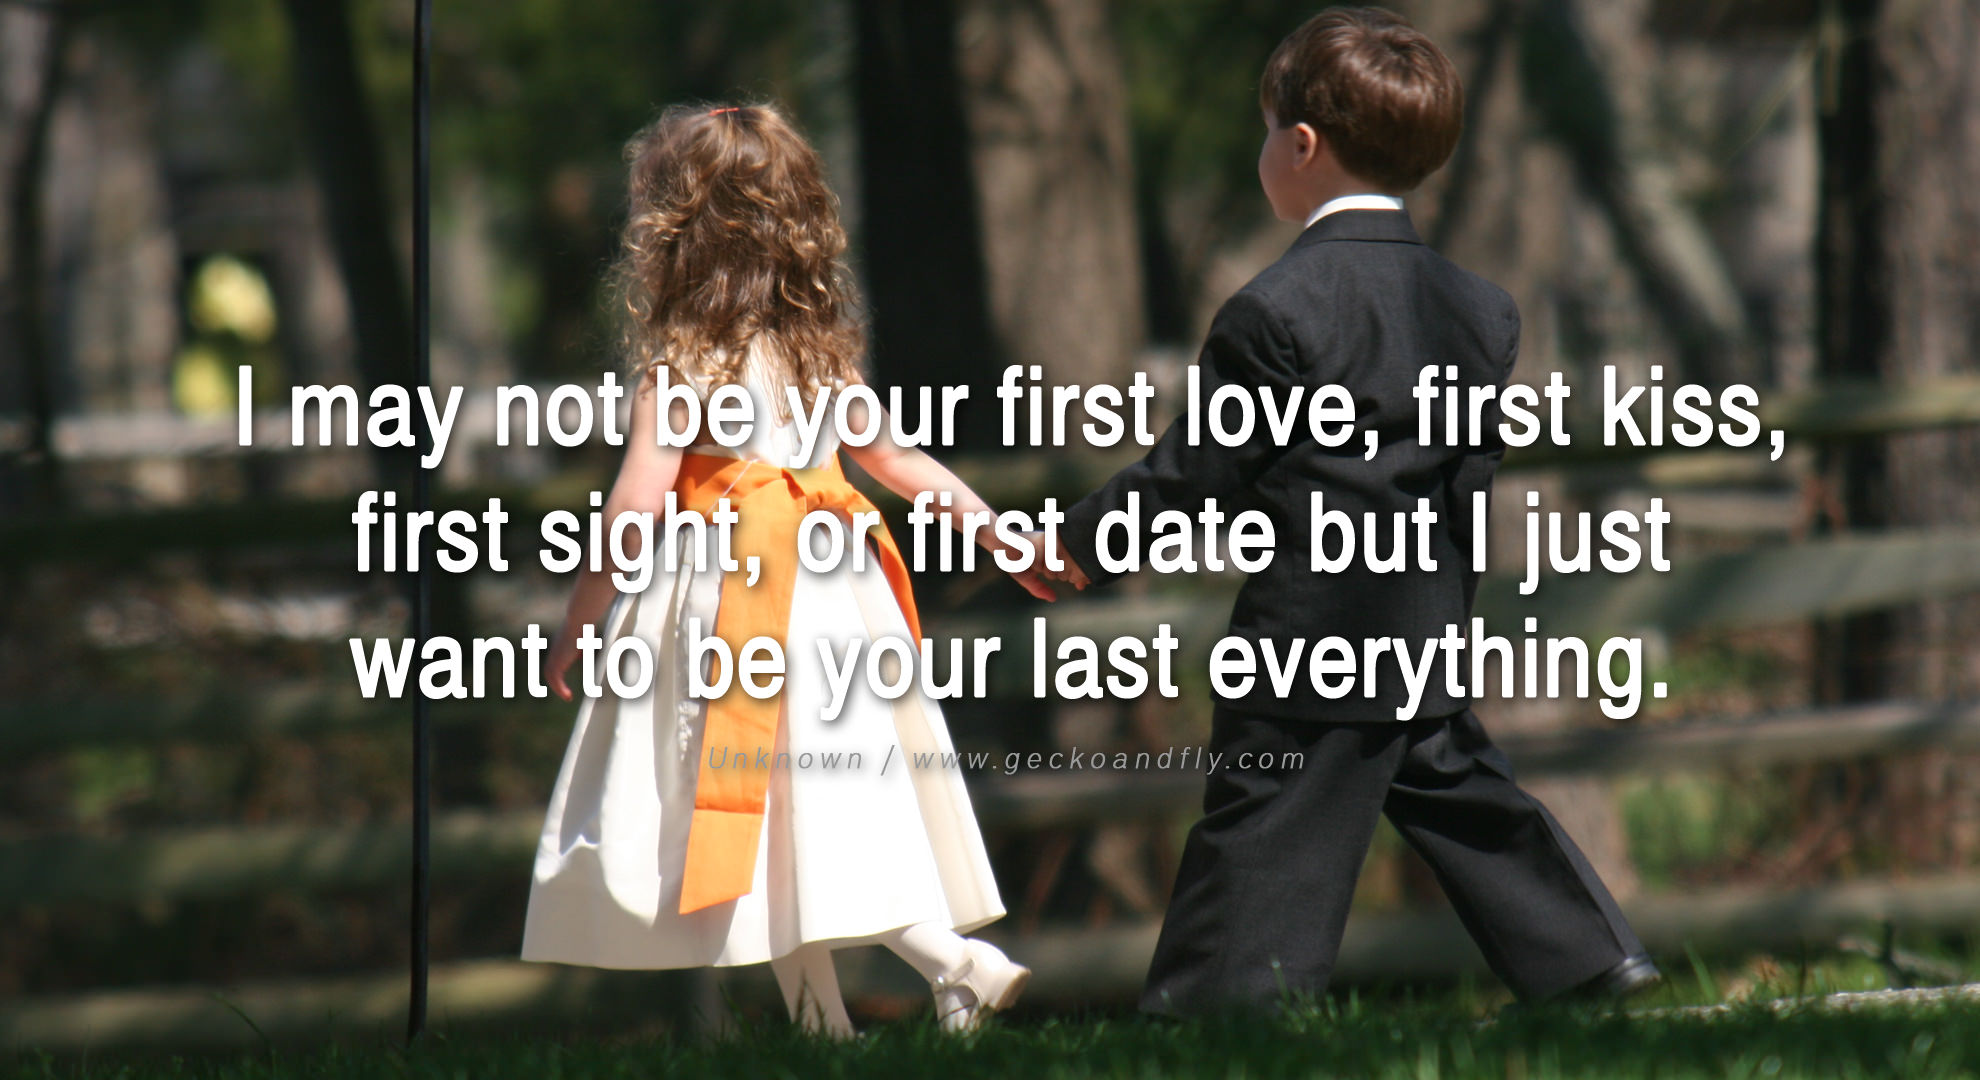 Our First Date Quotes. QuotesGram